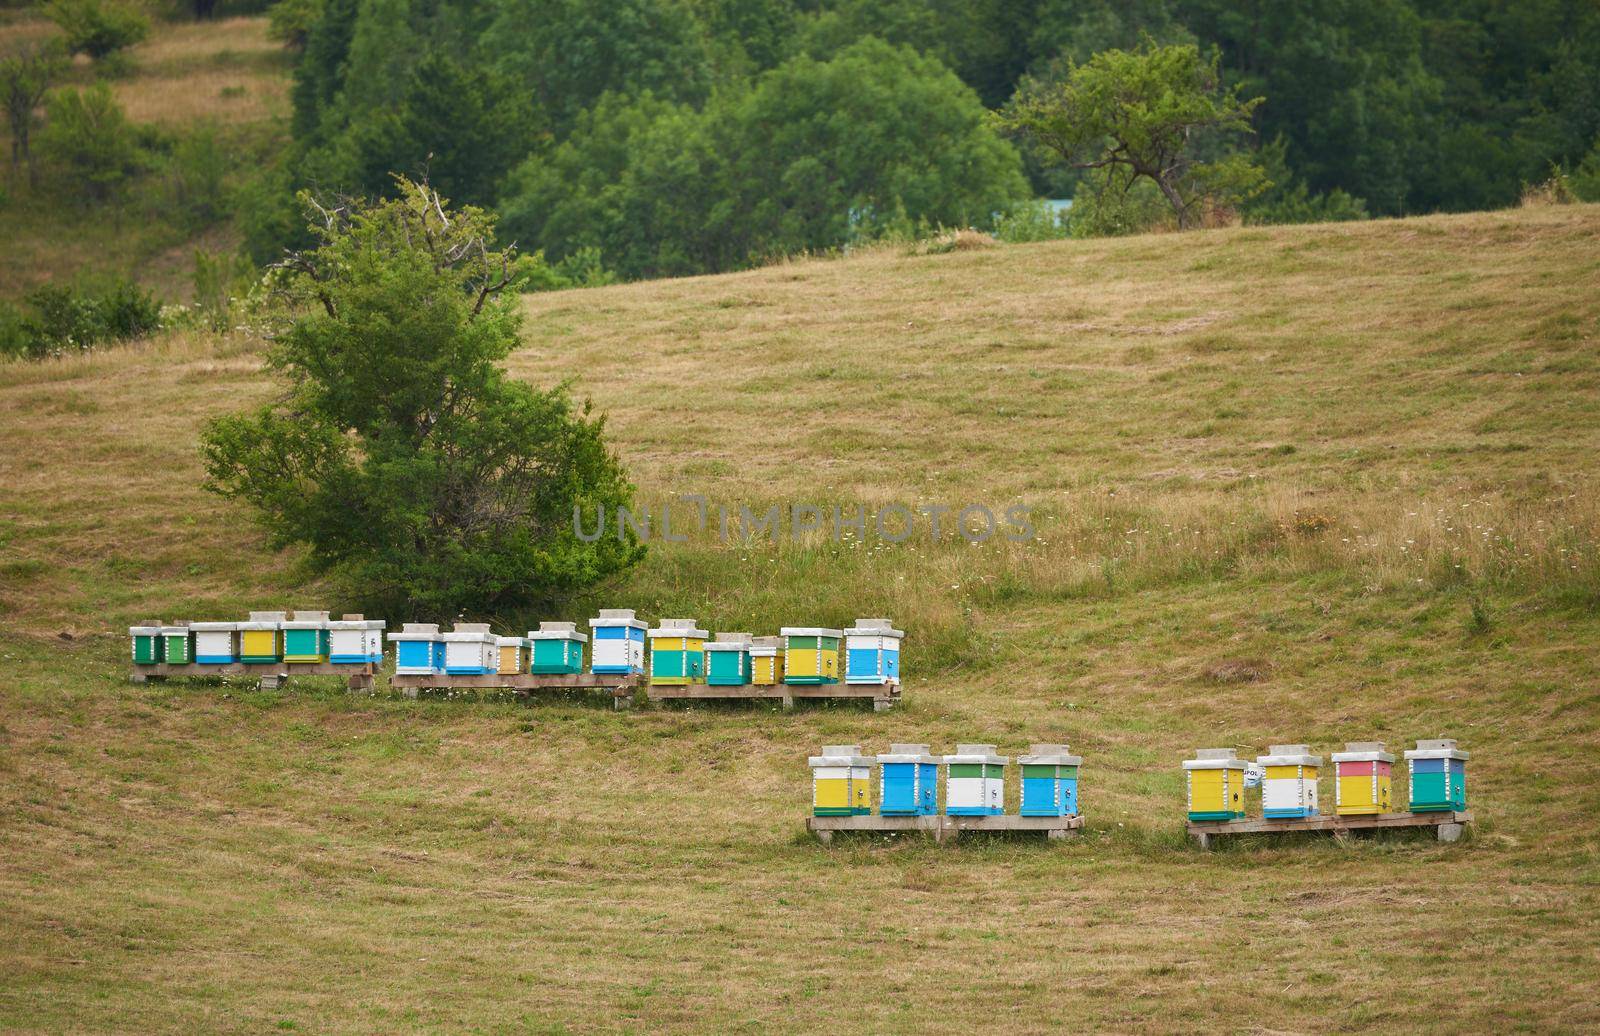 Bee hives on green grass in a field in Europe.